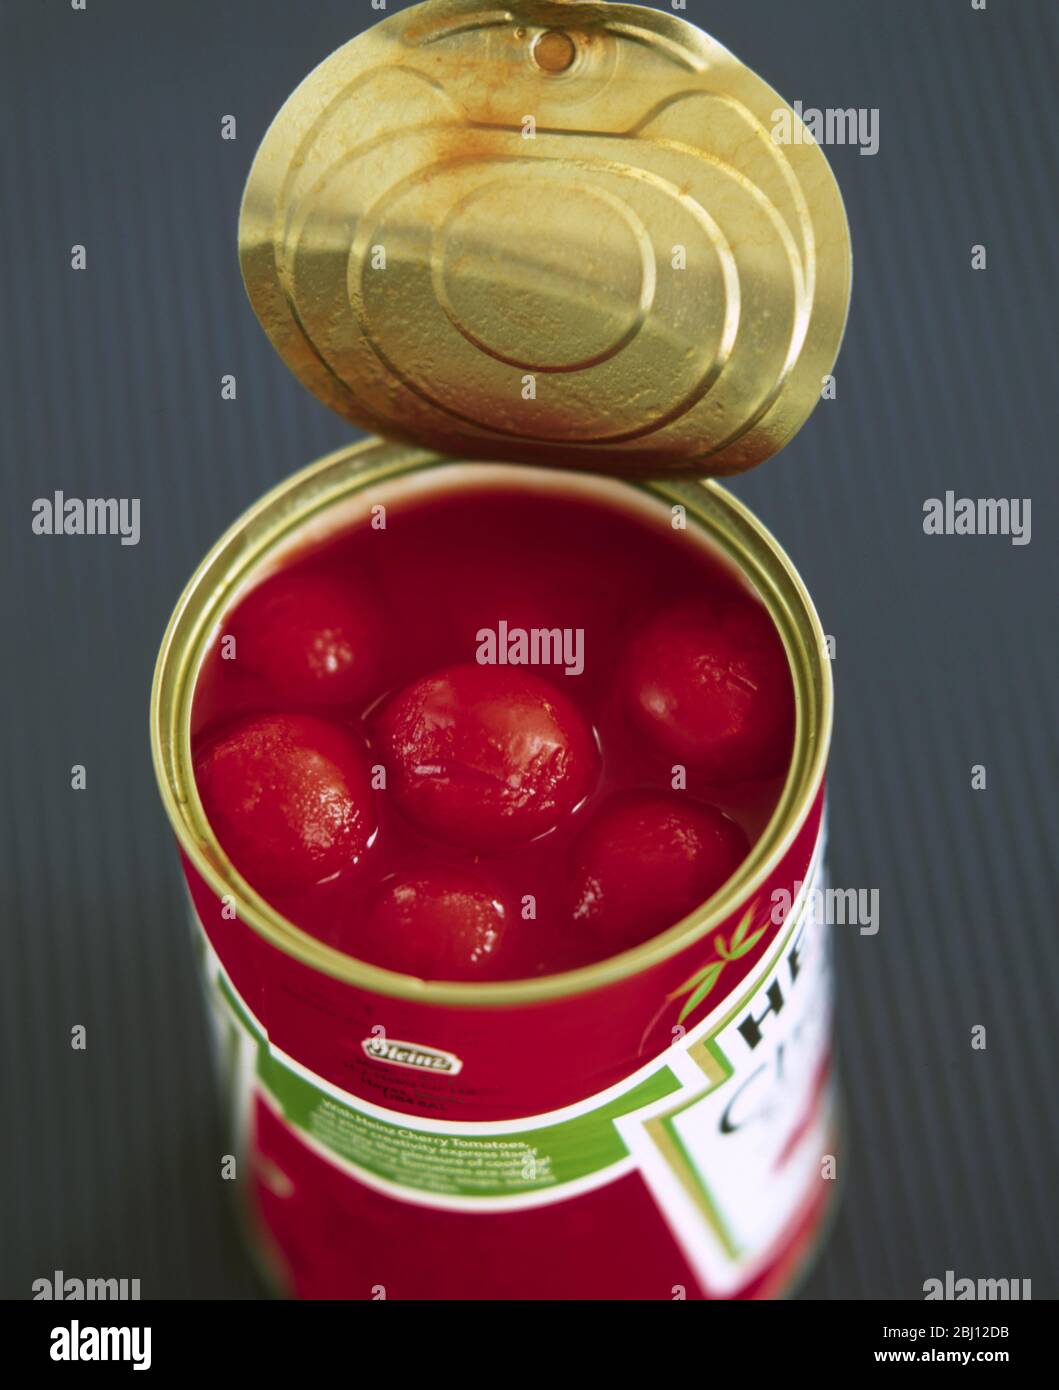 Canned cherry tomatoes - Stock Photo